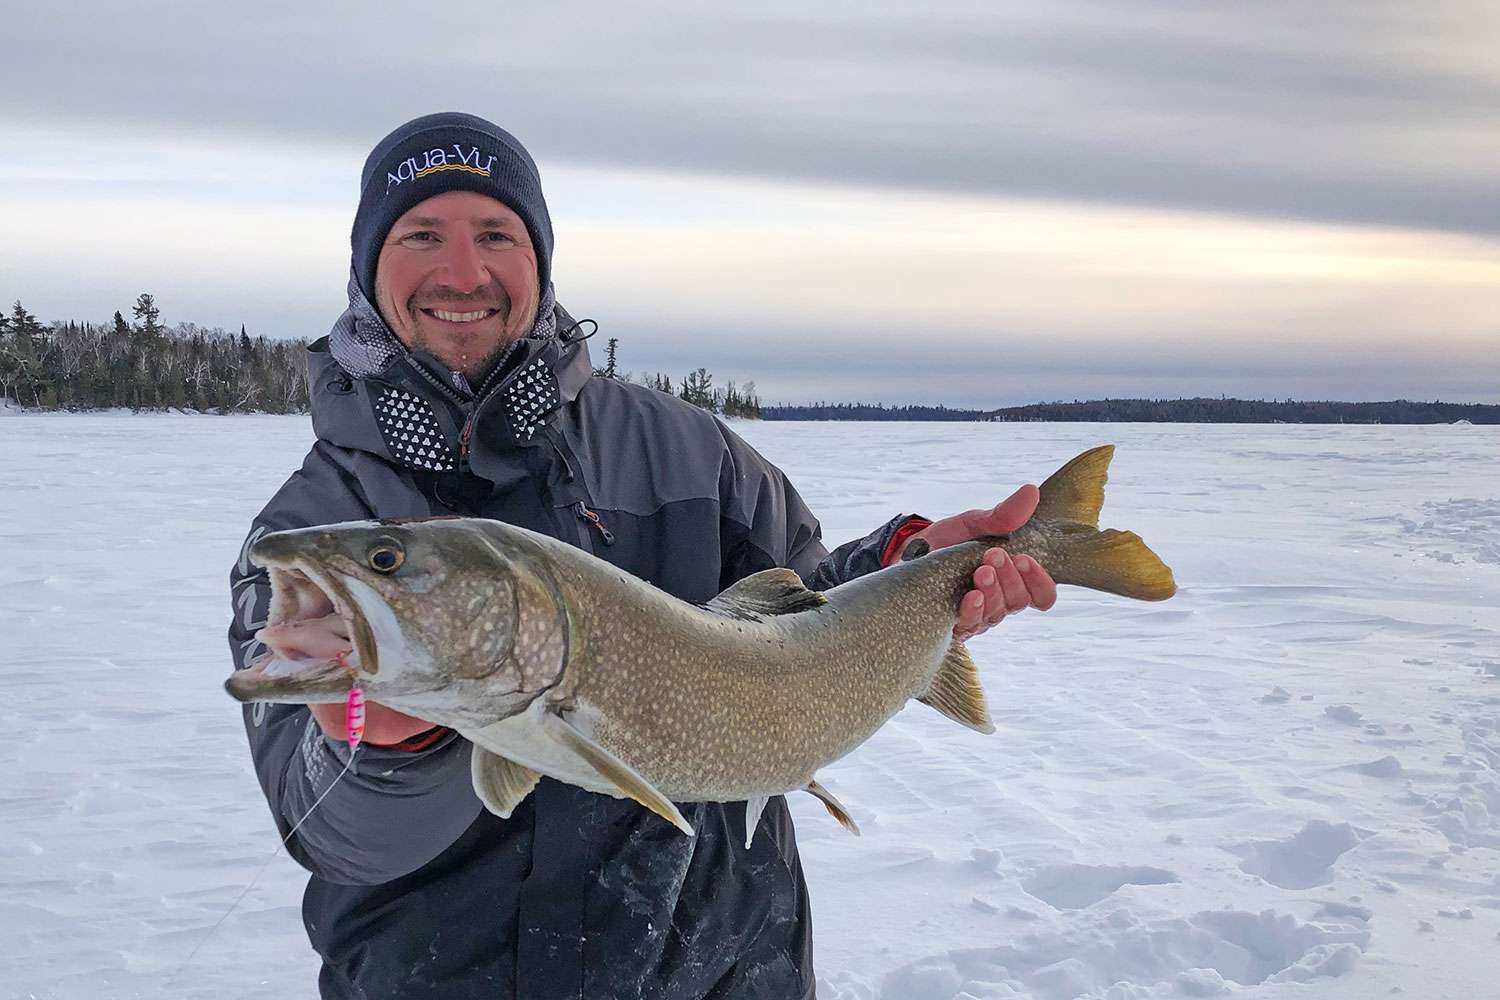 <b>Ice fishing at home, or fishing from a boat?</b></p>
<p>I ice fish at home because we have to put walleyes on the table. But I like being in the boat more, for sure. But ice fishingâs fun ...